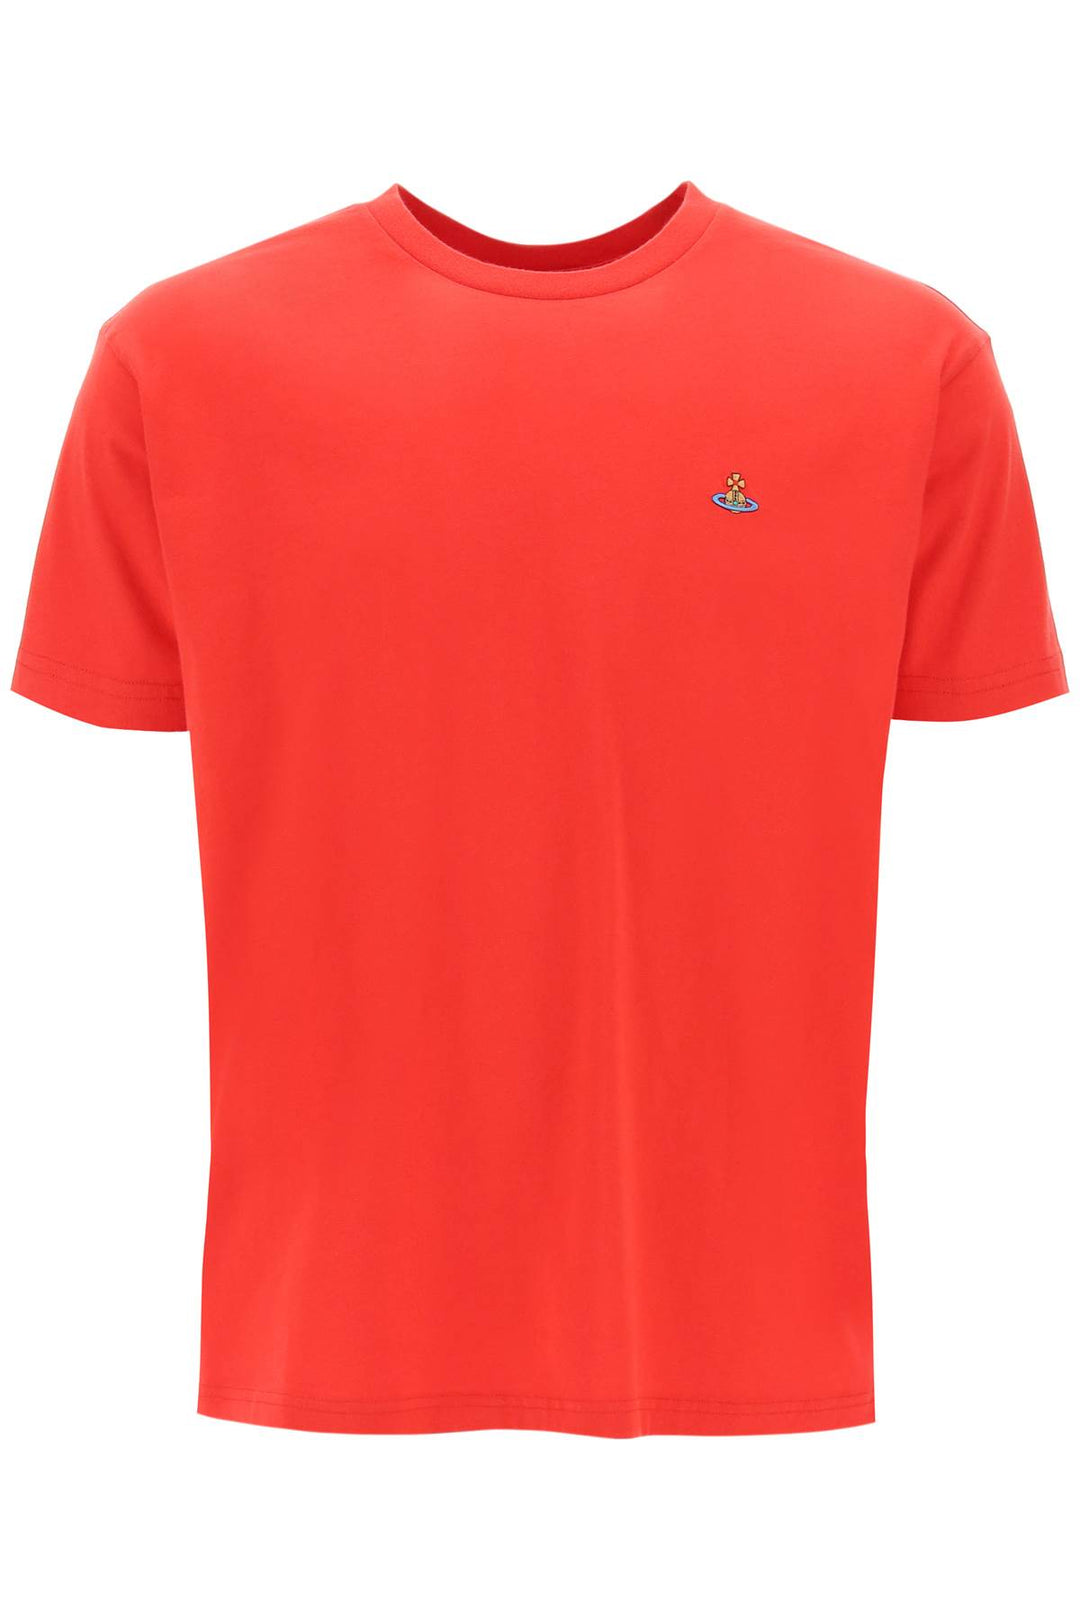 Vivienne westwood classic t-shirt with orb logo-0